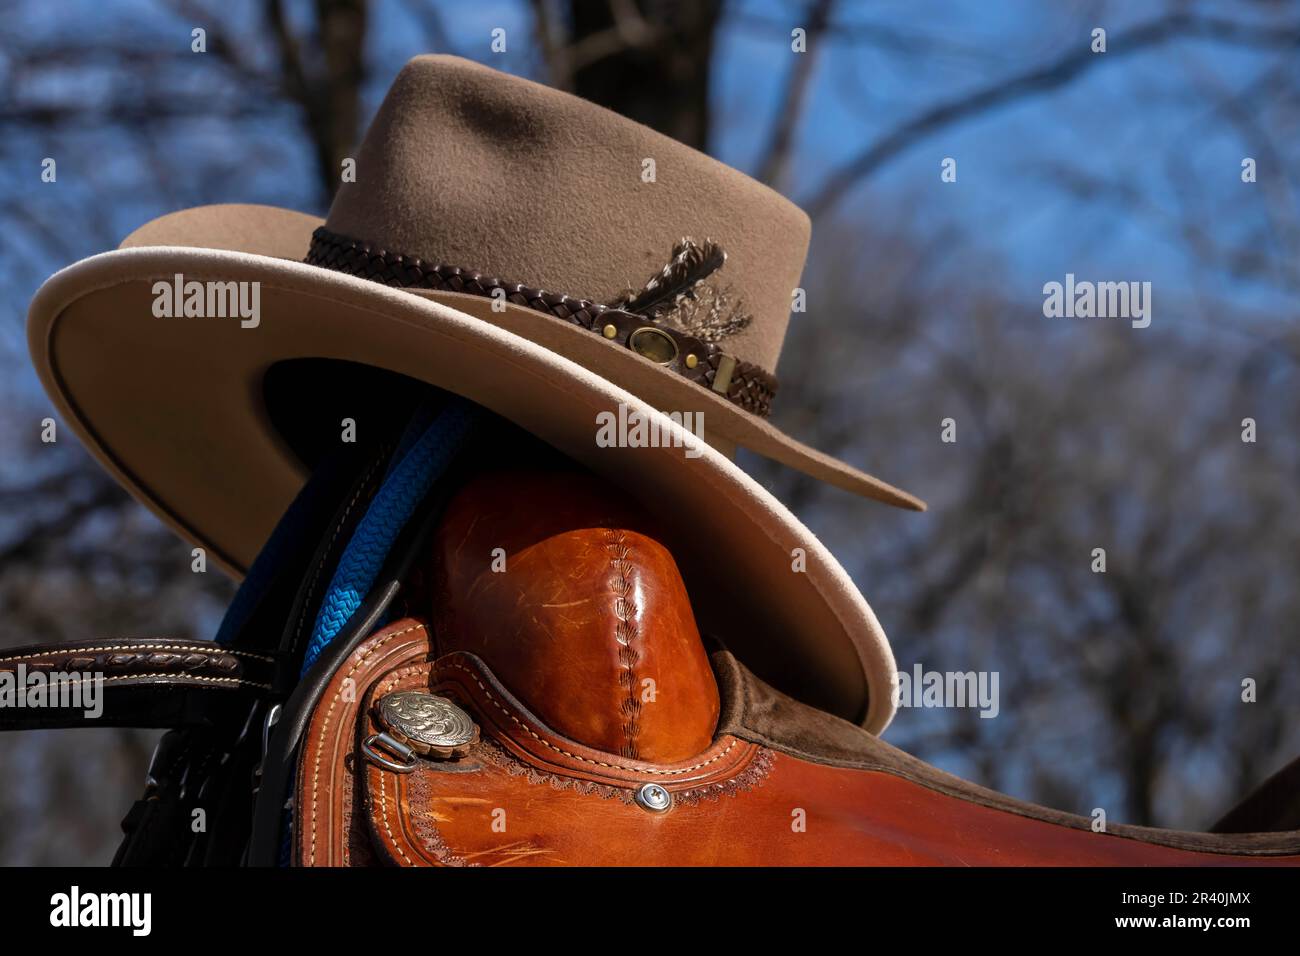 Closeup View Of Horse Tackle and Riding Equipment On A Local Farm Stock Photo